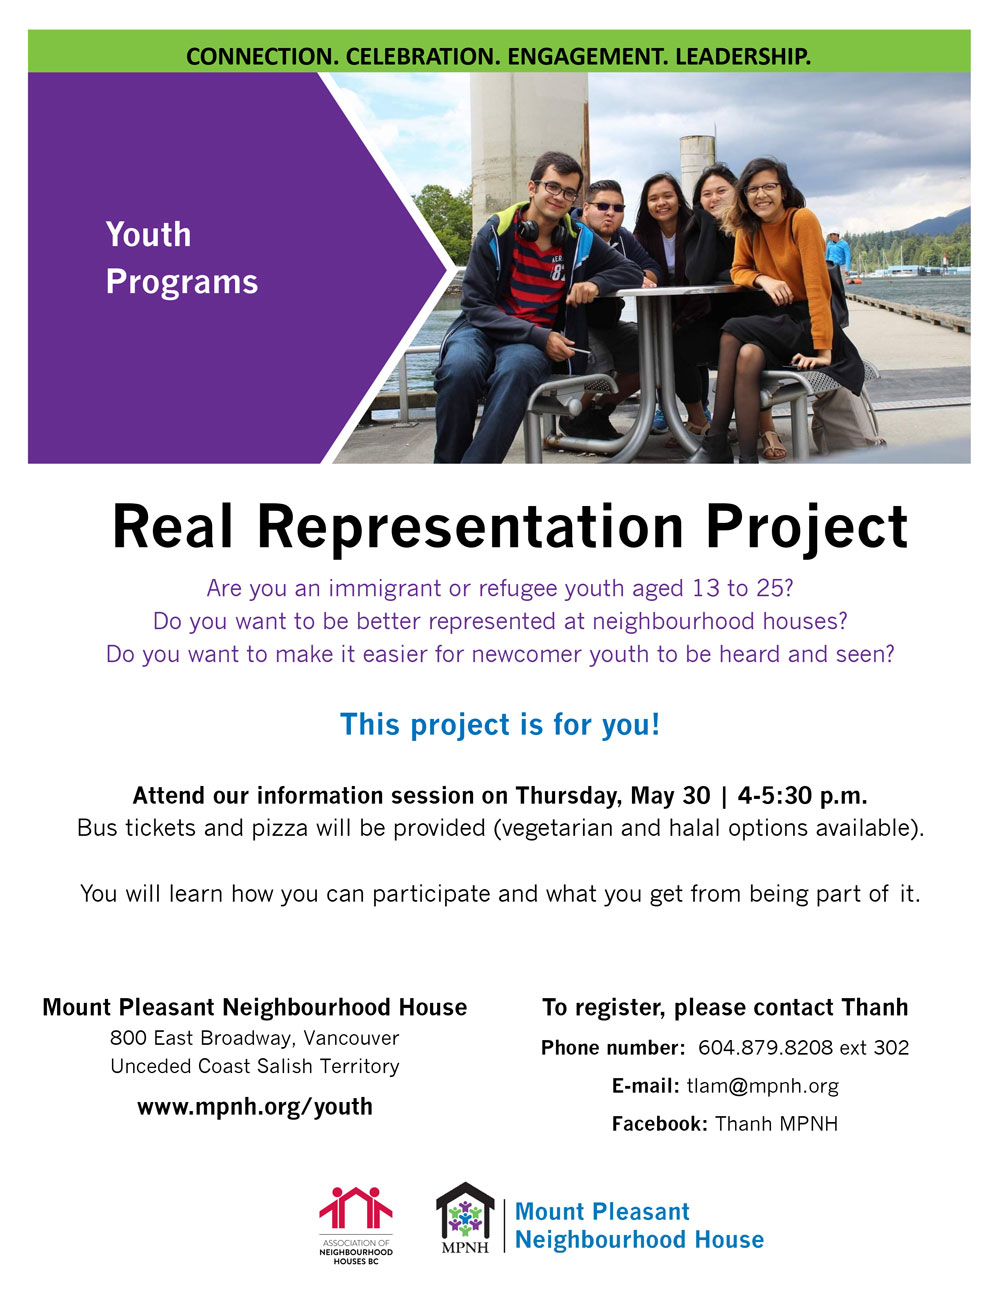 An image of hte poster with event details, along with a photo of culturally diverse youth and leaders at an outdoor picnic table.